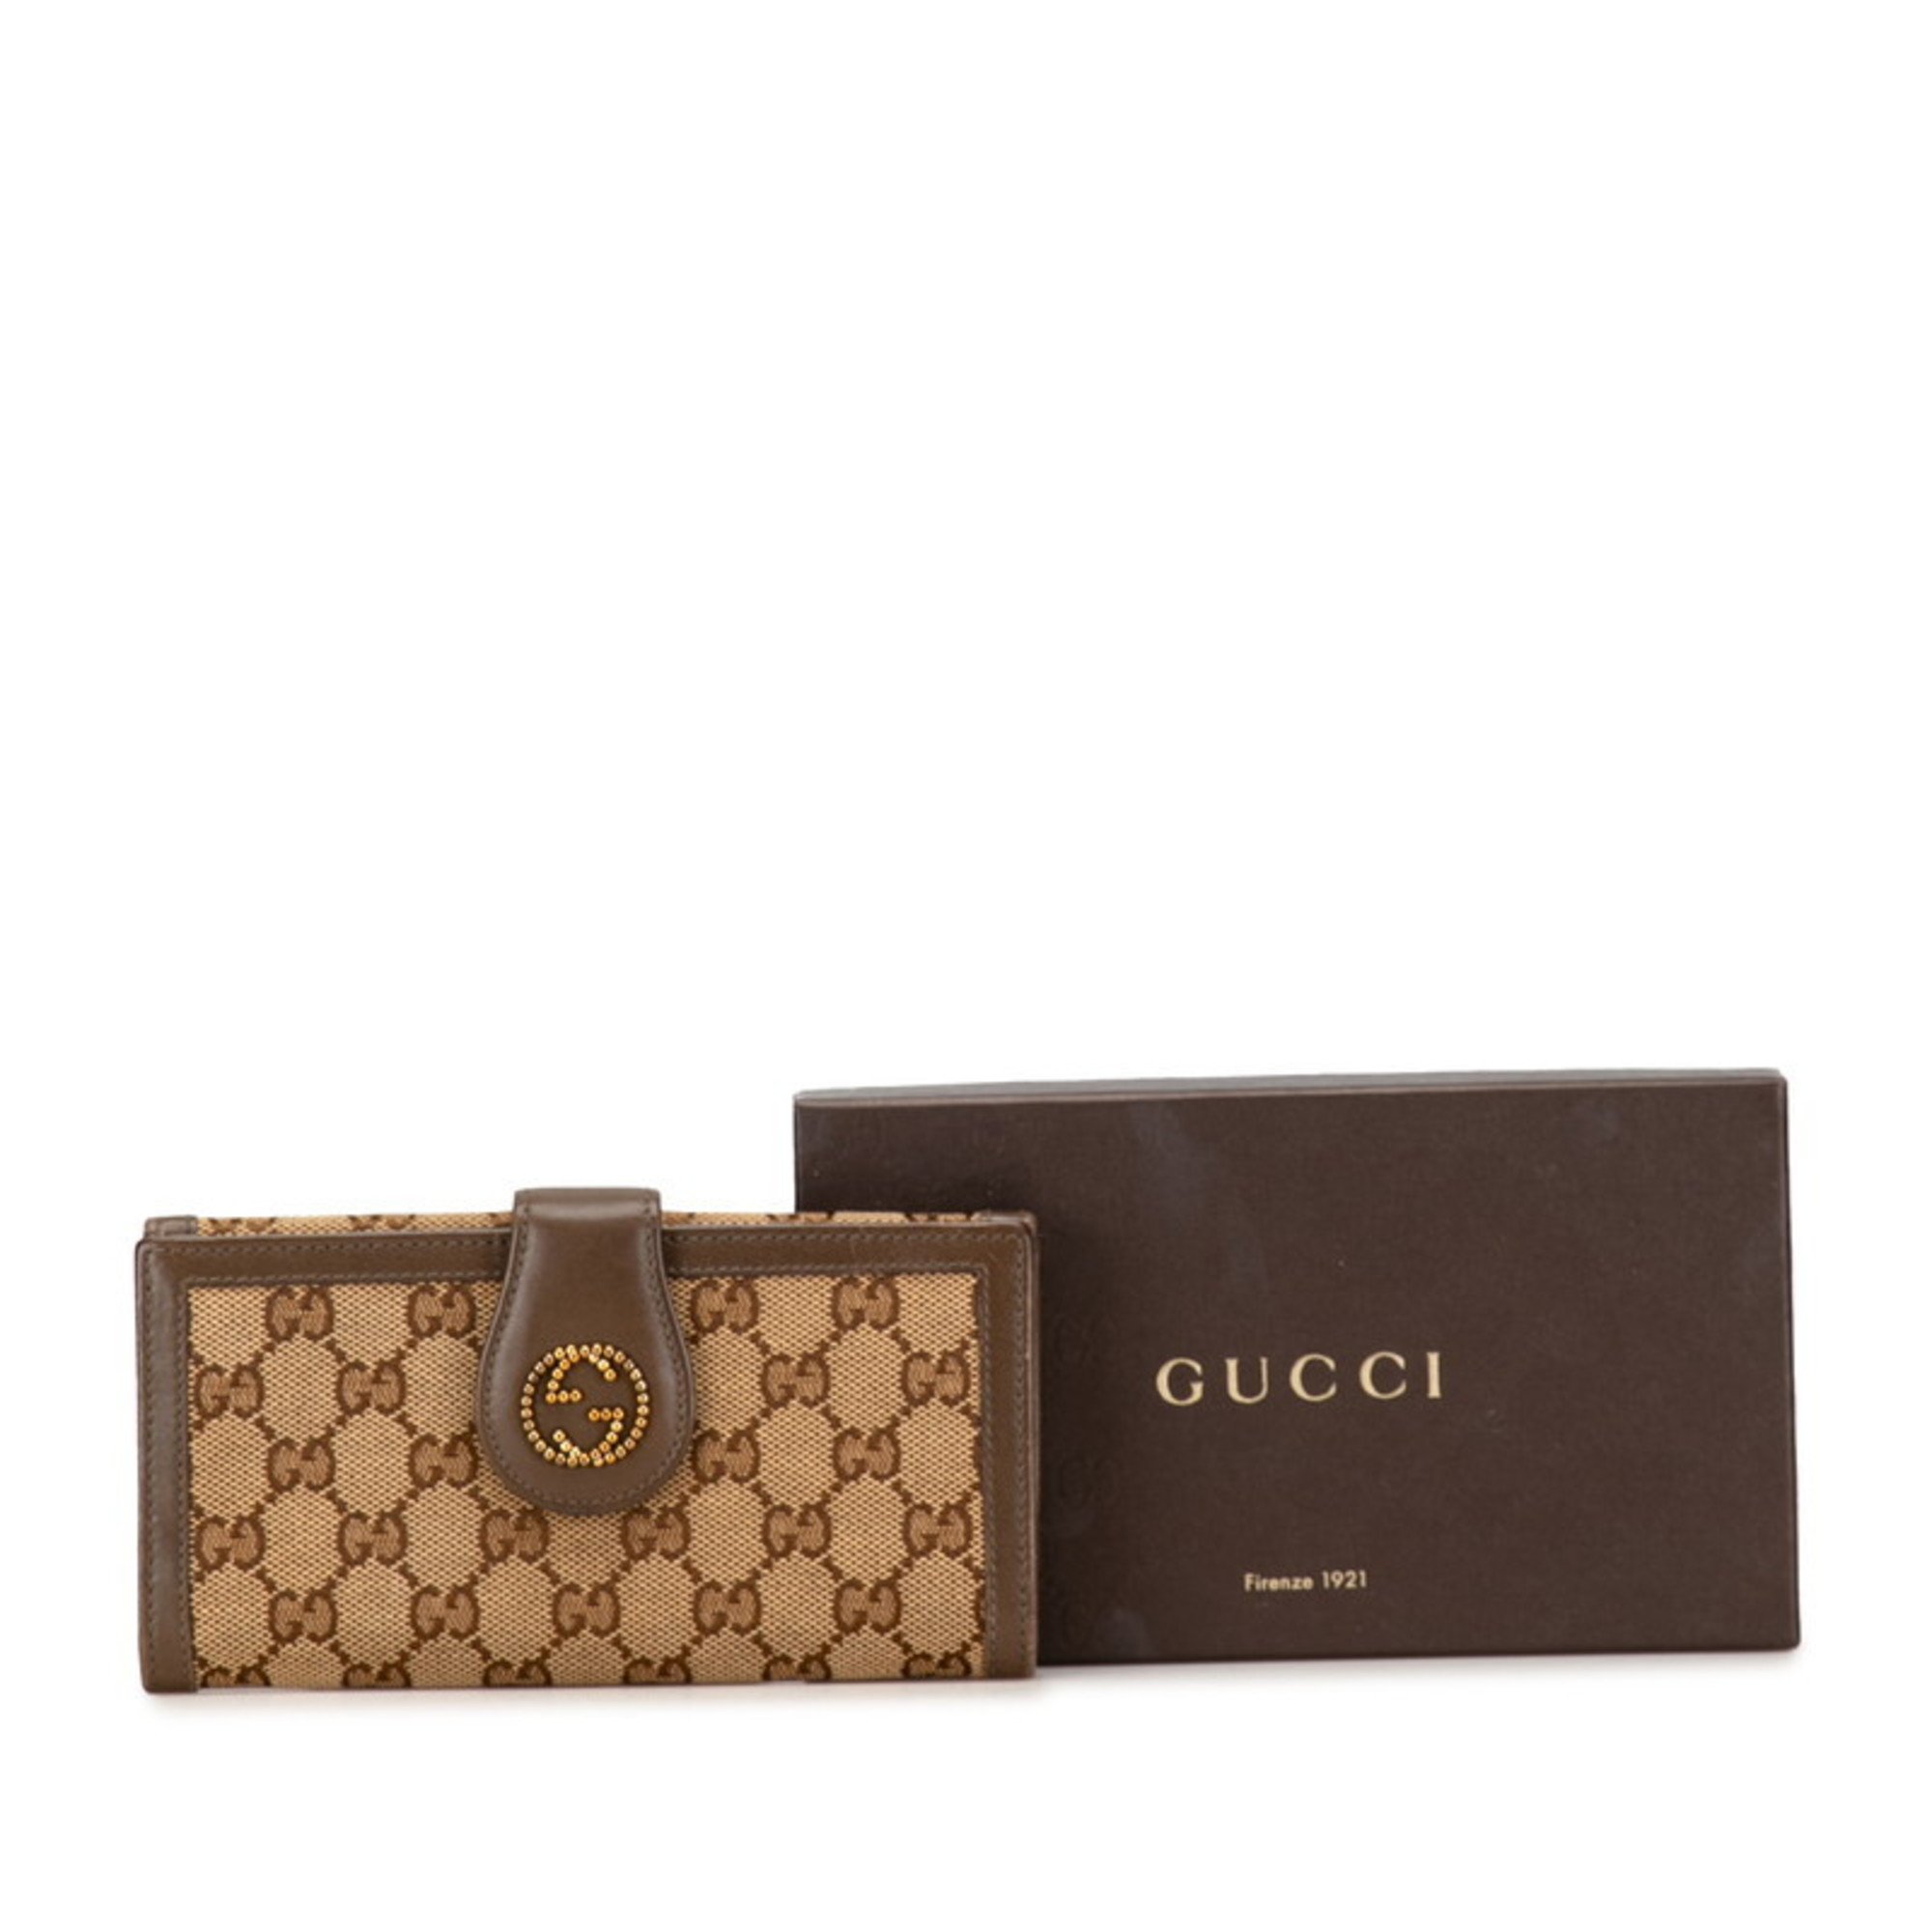 Gucci GG Canvas Interlocking G Studs Long Wallet 269970 Brown Leather Women's GUCCI